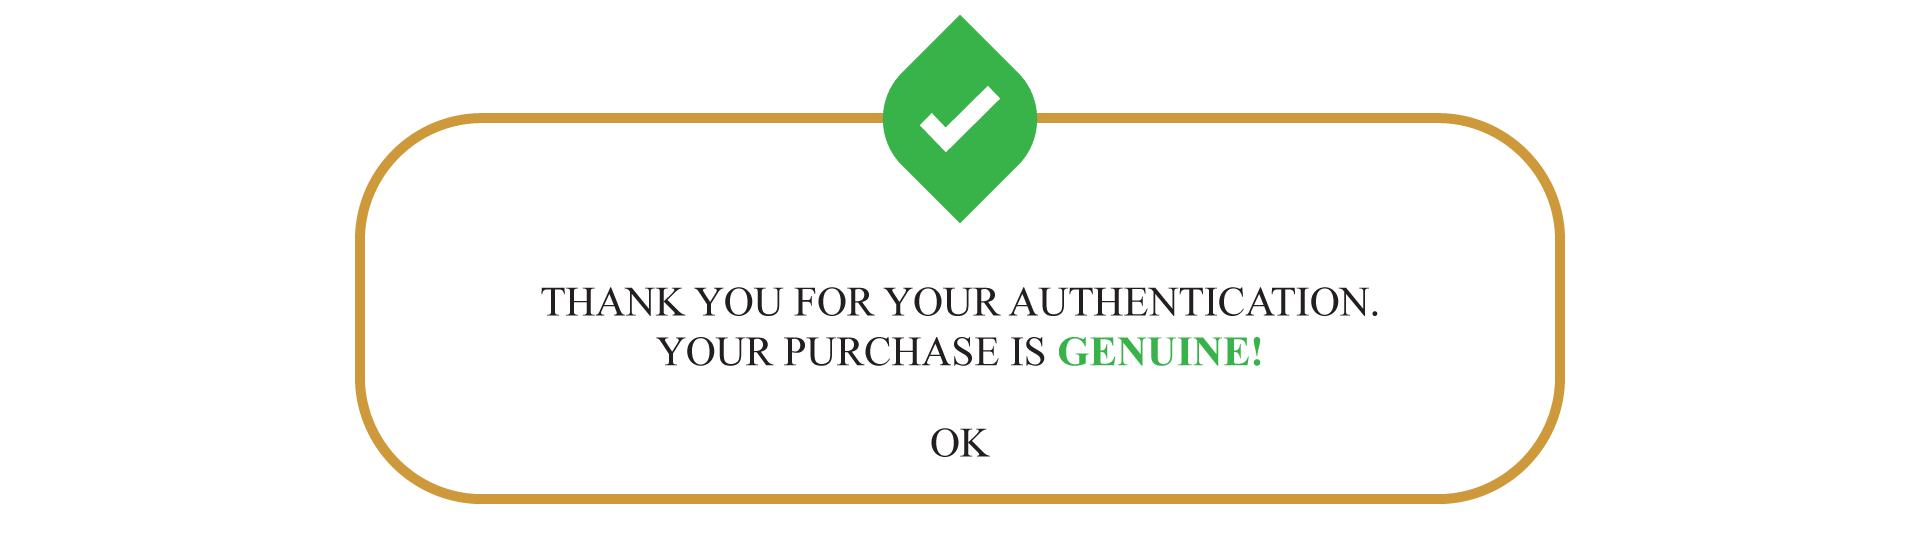 AFYAA Genuine Product Verification Pop Up Message